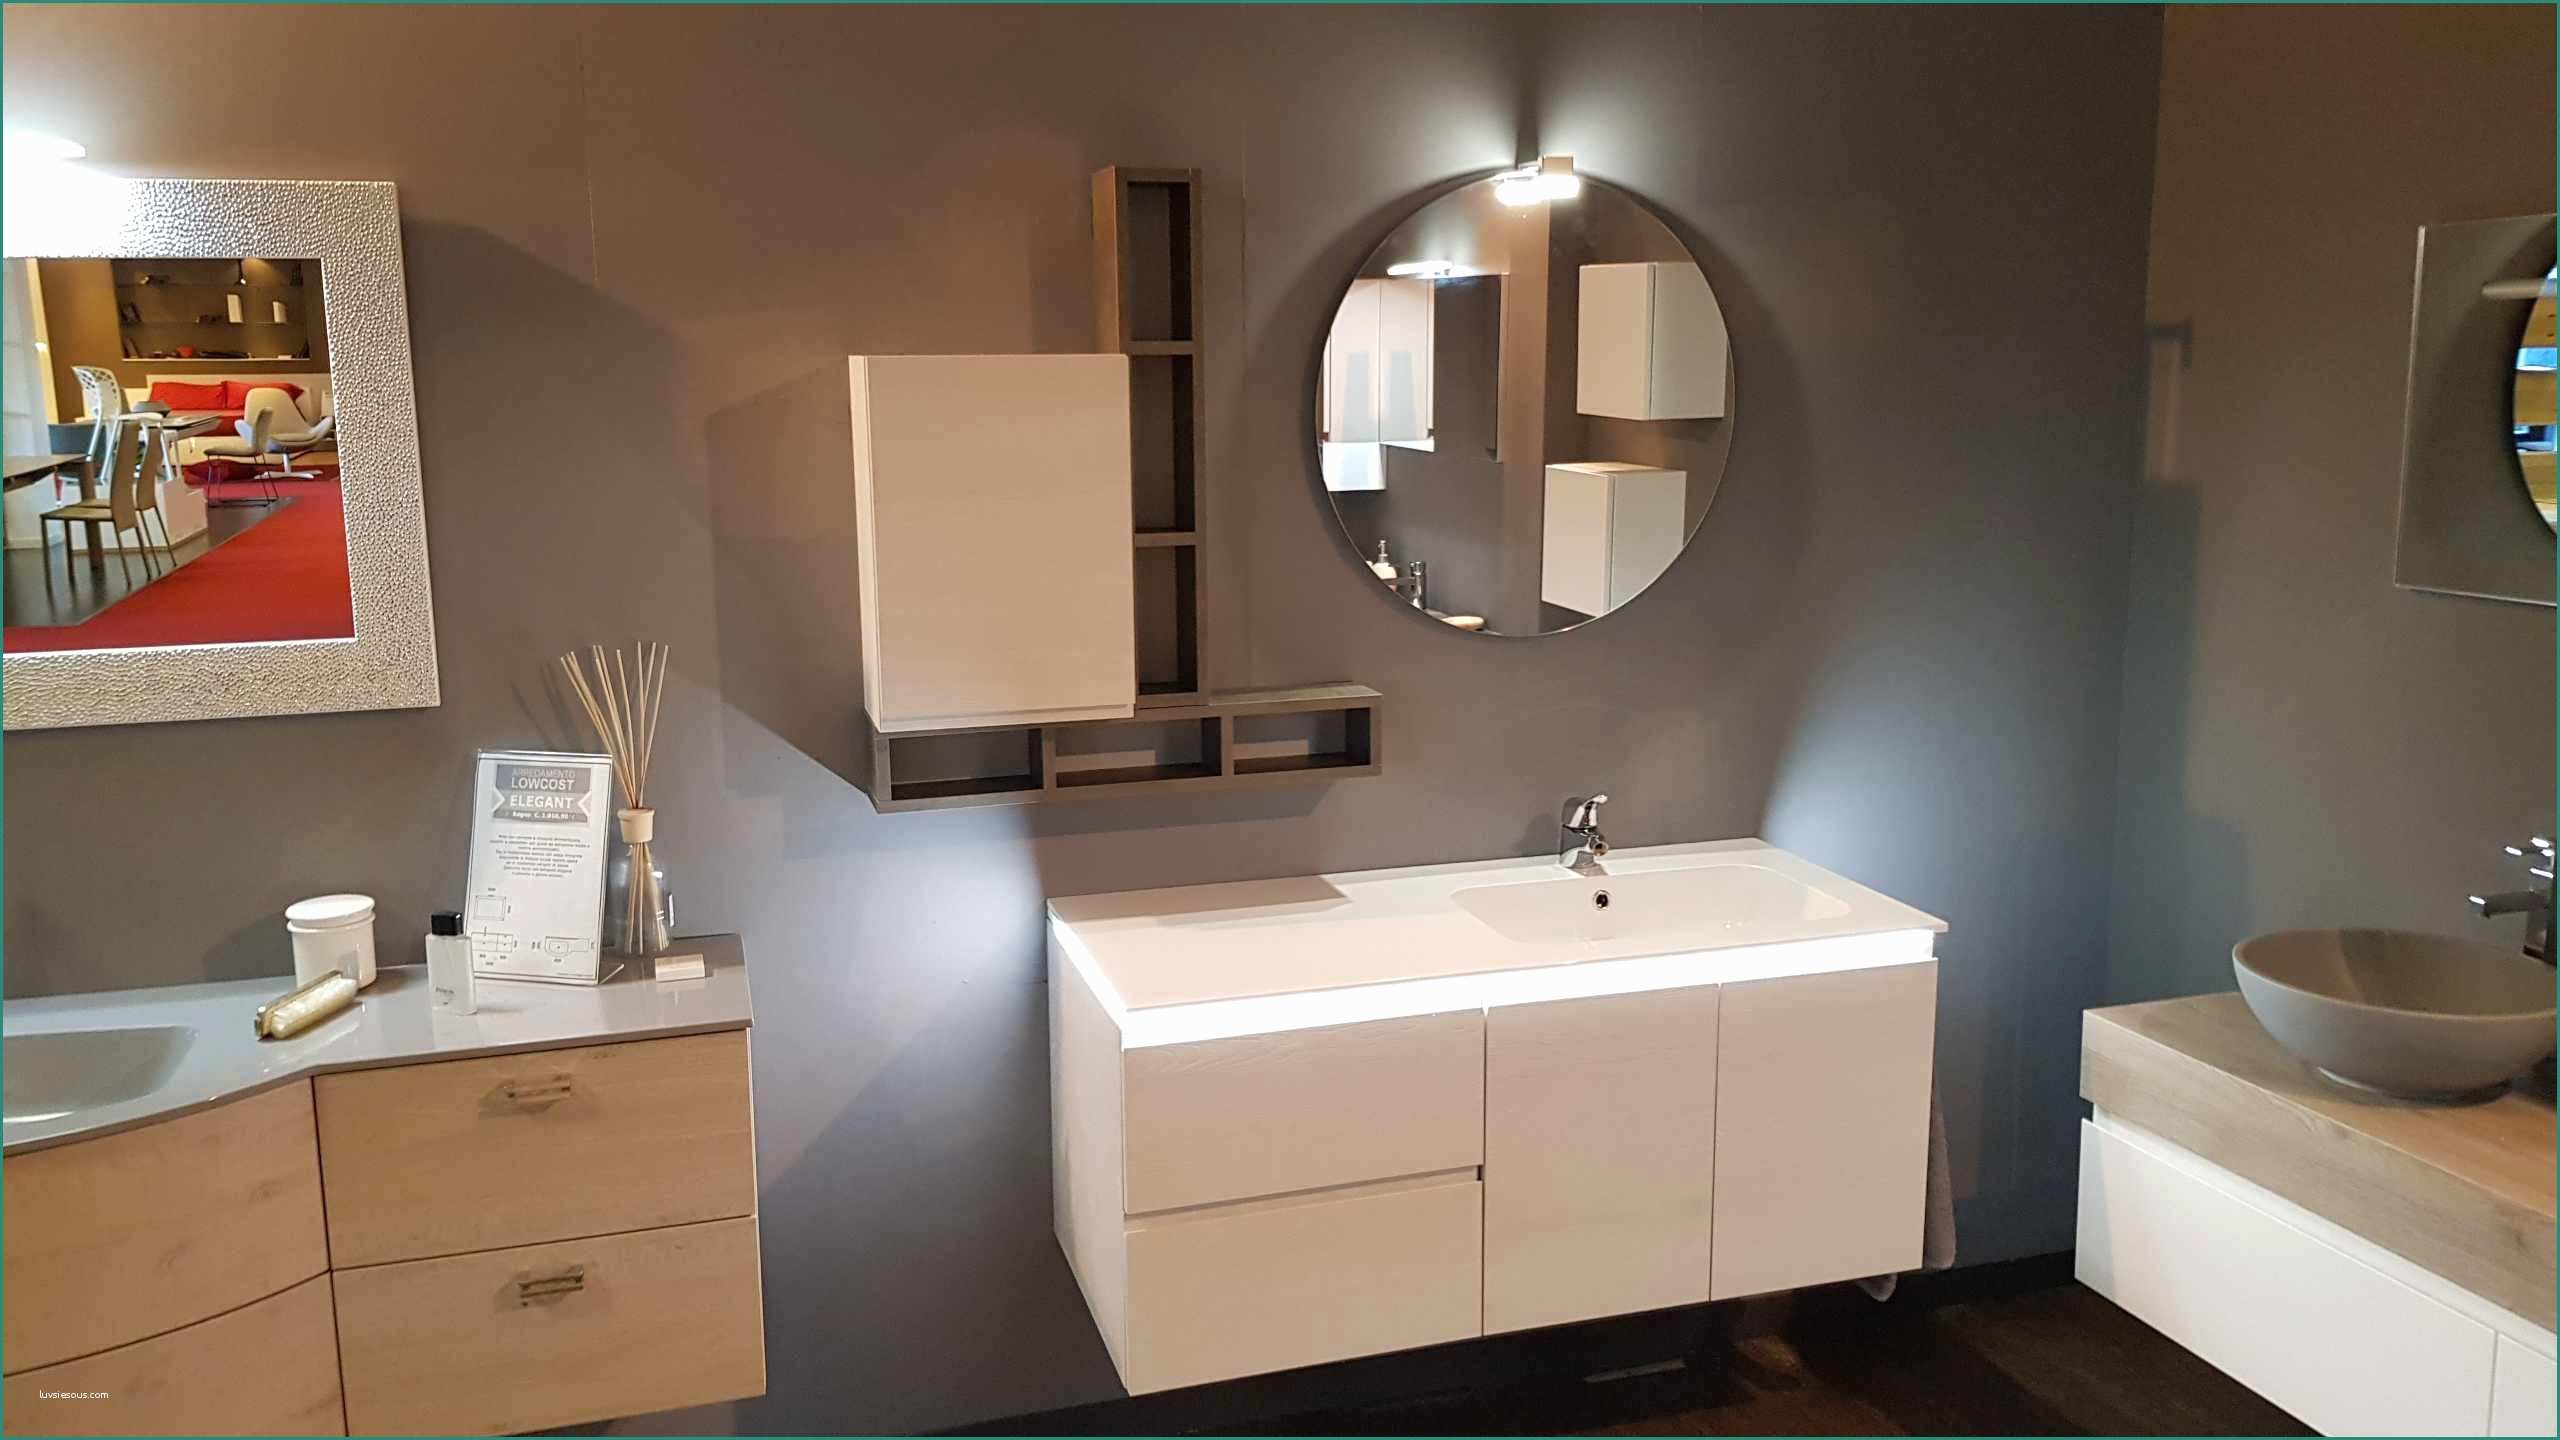 Outlet Arredo Bagno E Outlet Bagno Pab In Offerta Con Luce A Led Arredo